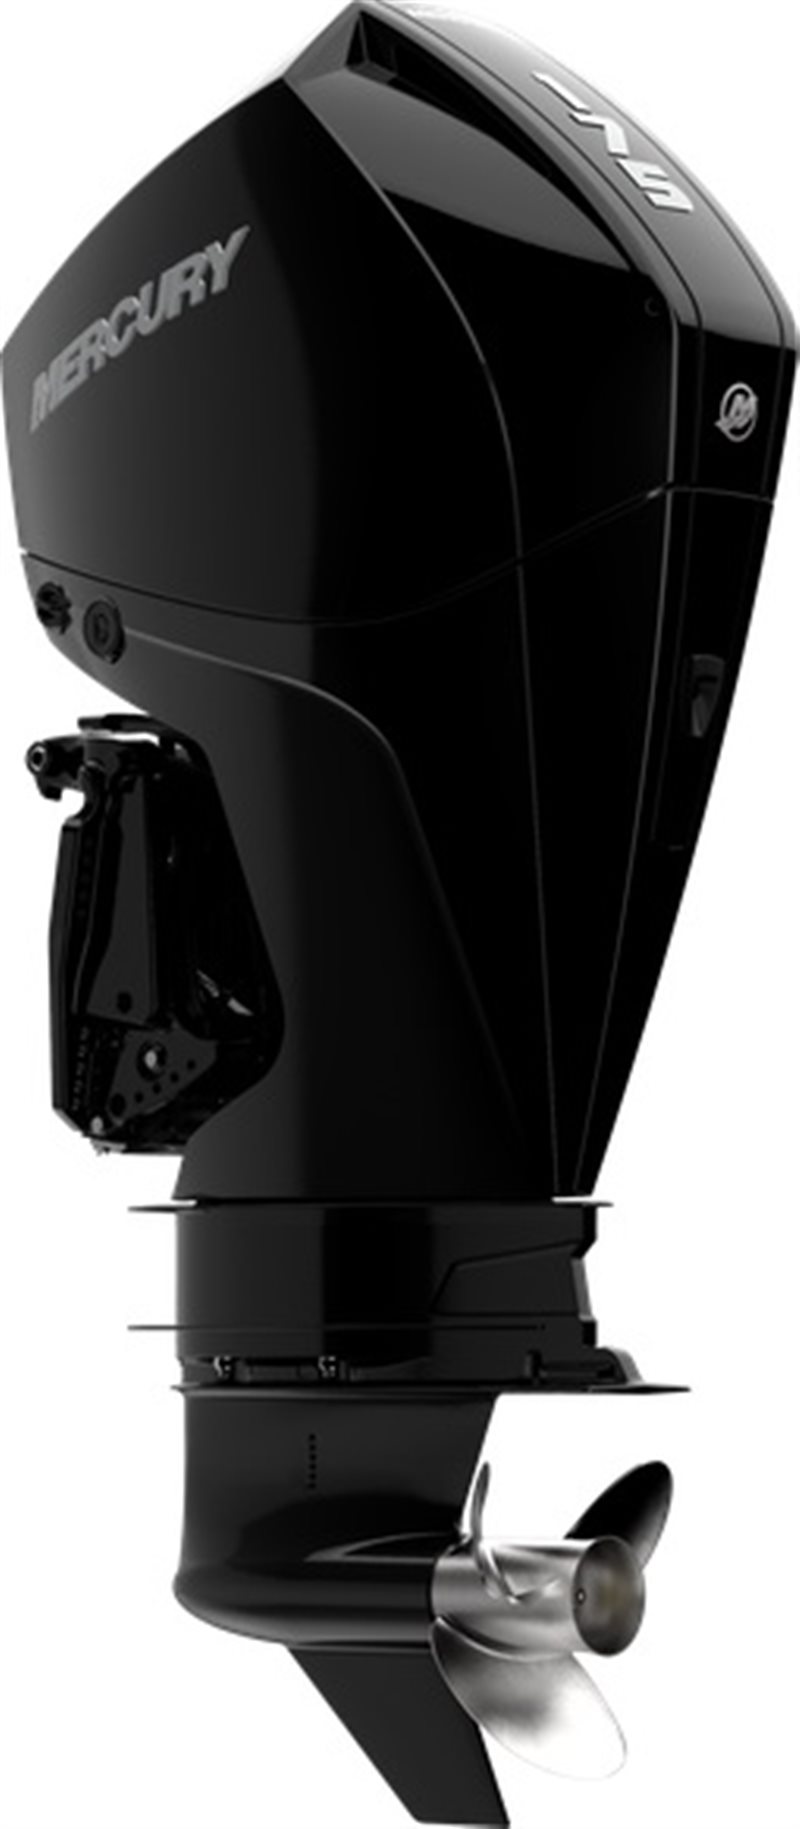 2020 Mercury Outboard Fourstroke 175 - 300 250 HP at Fort Fremont Marine